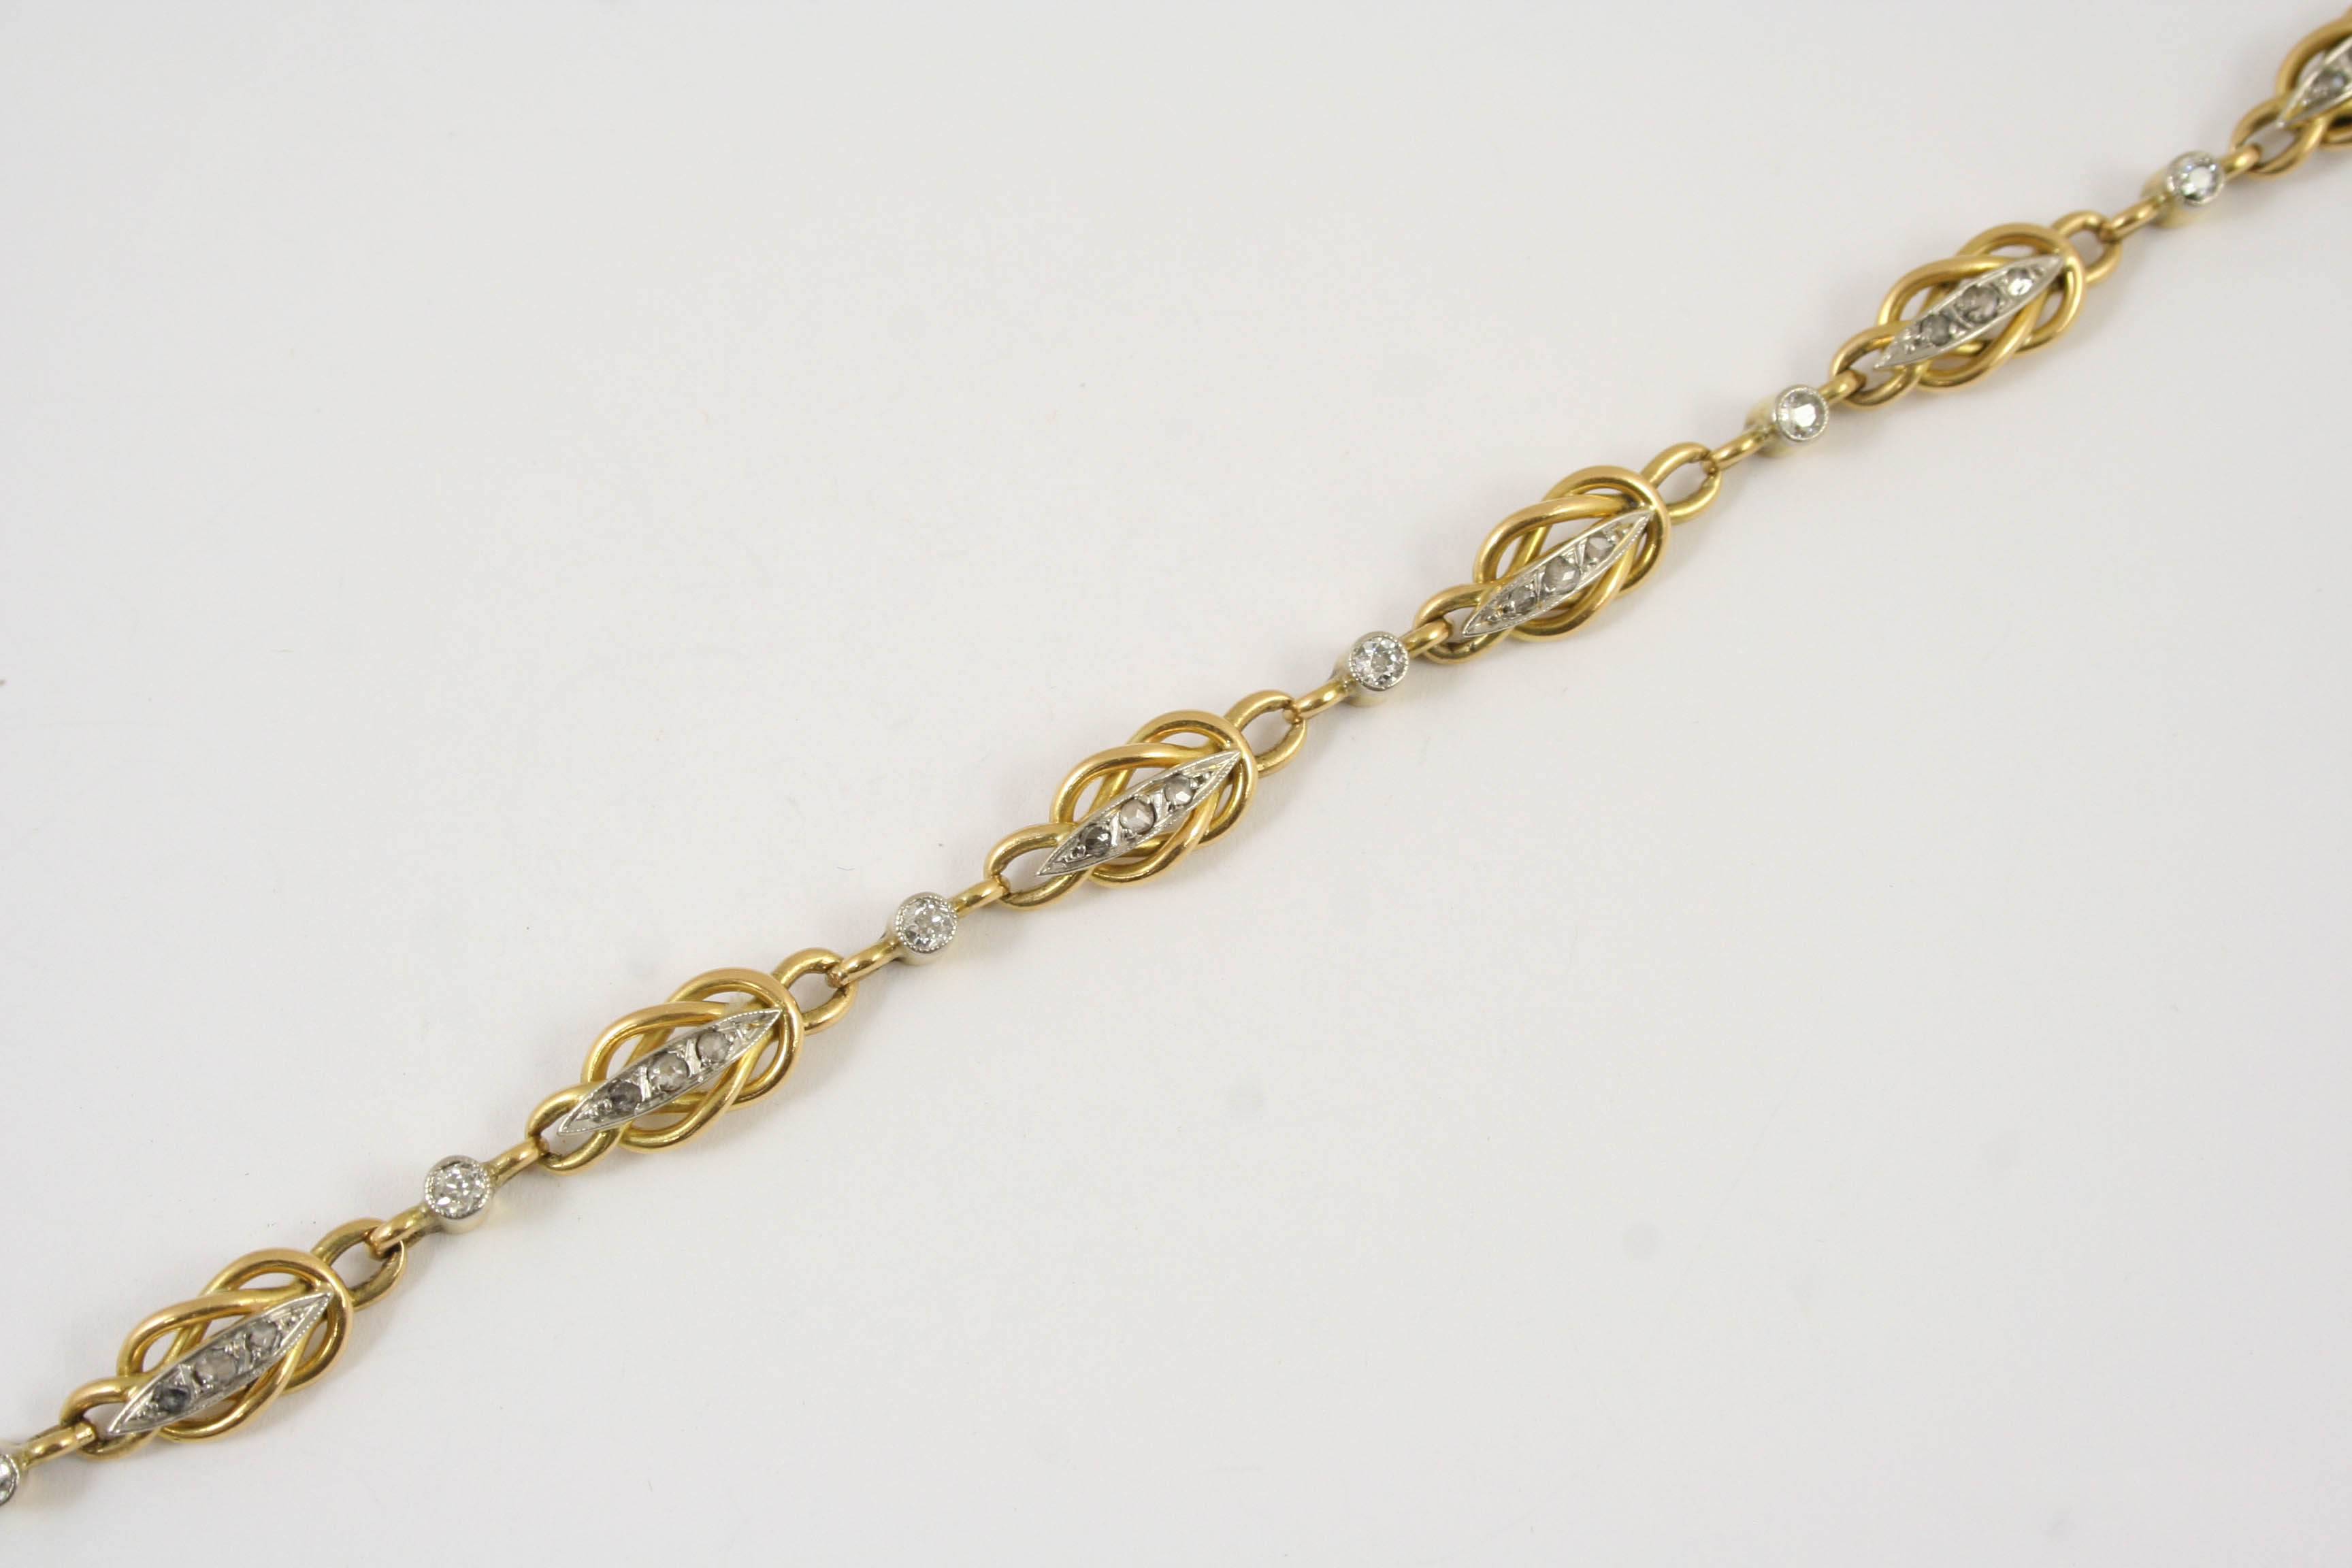 A FRENCH DIAMOND AND GOLD BRACELET the gold fancy link bracelet is mounted with rose-cut and